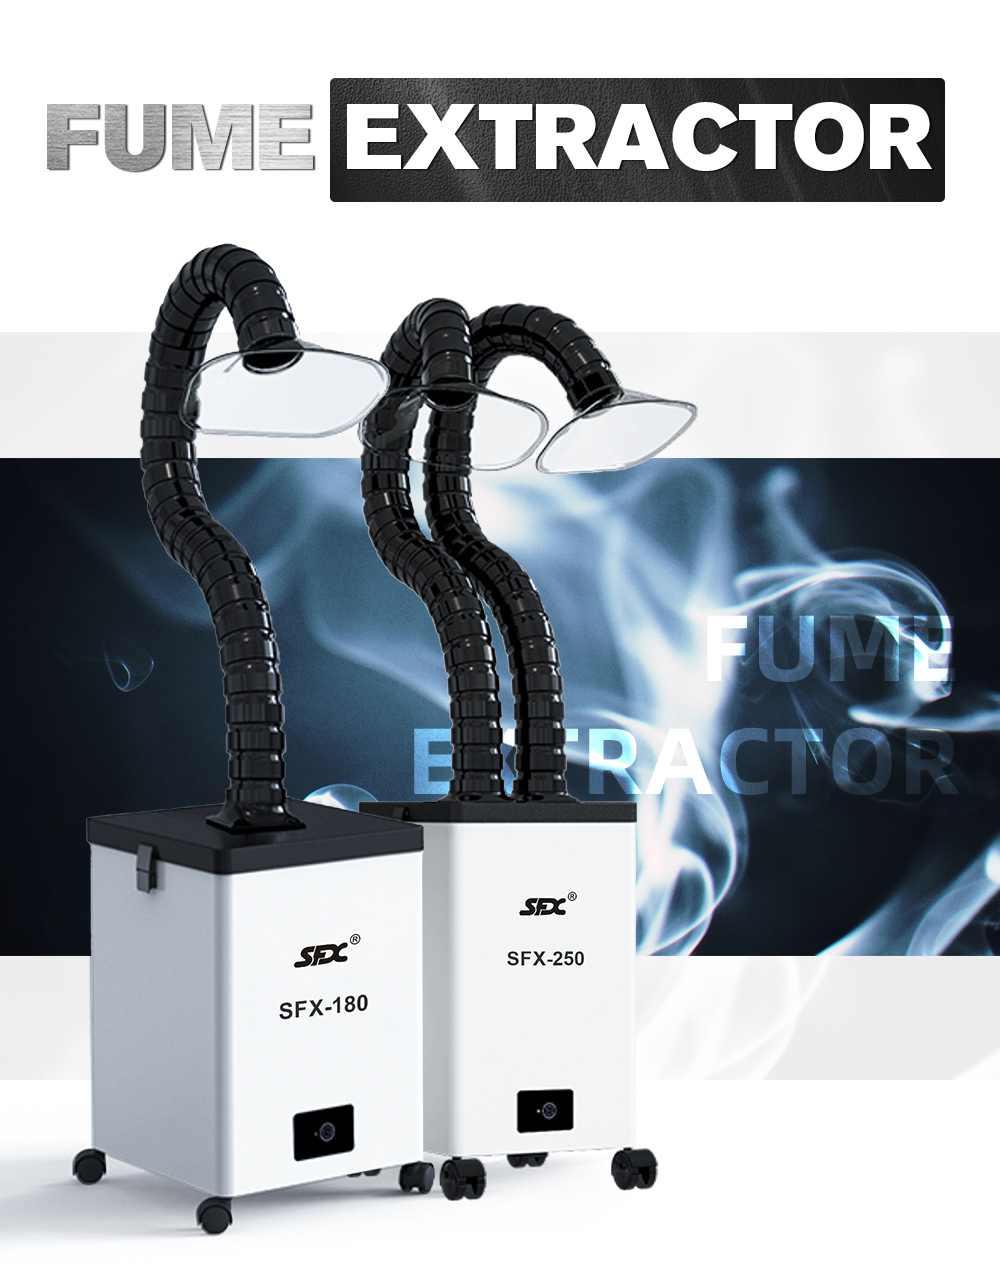 SFX Fume Extractor for Laser Engraver/Solder Air/Smoke Purifier 3 Filter Layers SFX Fume Extractor for Laser Engraver/Solder Air/Smoke Purifier 3 Filter Layers SFX Laser,SFX fiber laser engraver,SFX Fume Extractor,Air/Smoke Purifier